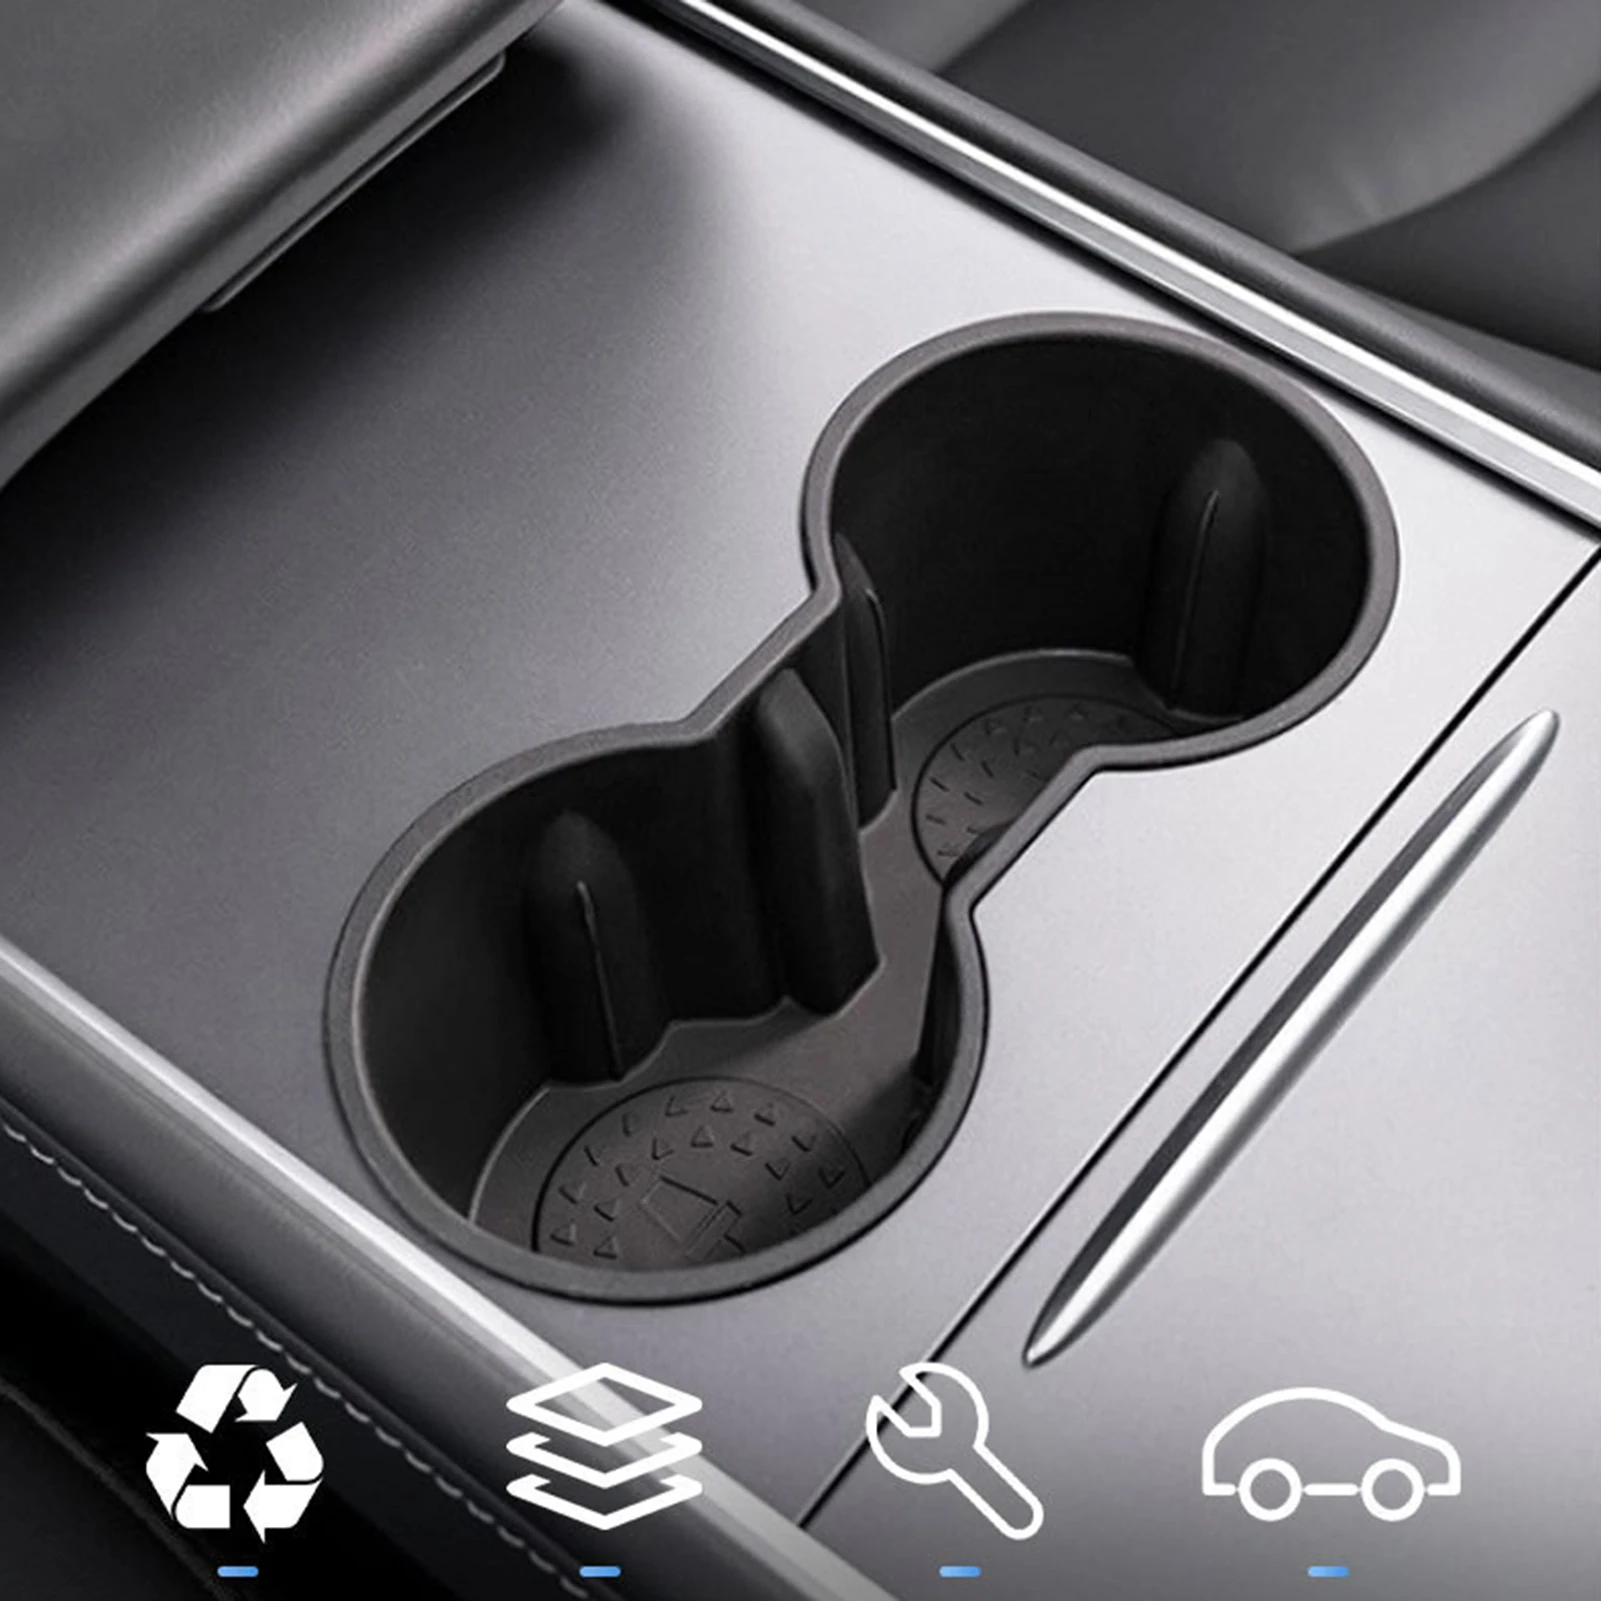 

Car Cup Holder Auto Seat Gap Water Drink Cup TPE Car Interior Center Console Cup Holder Insert For Tesla Model 3 Model Y Cozy